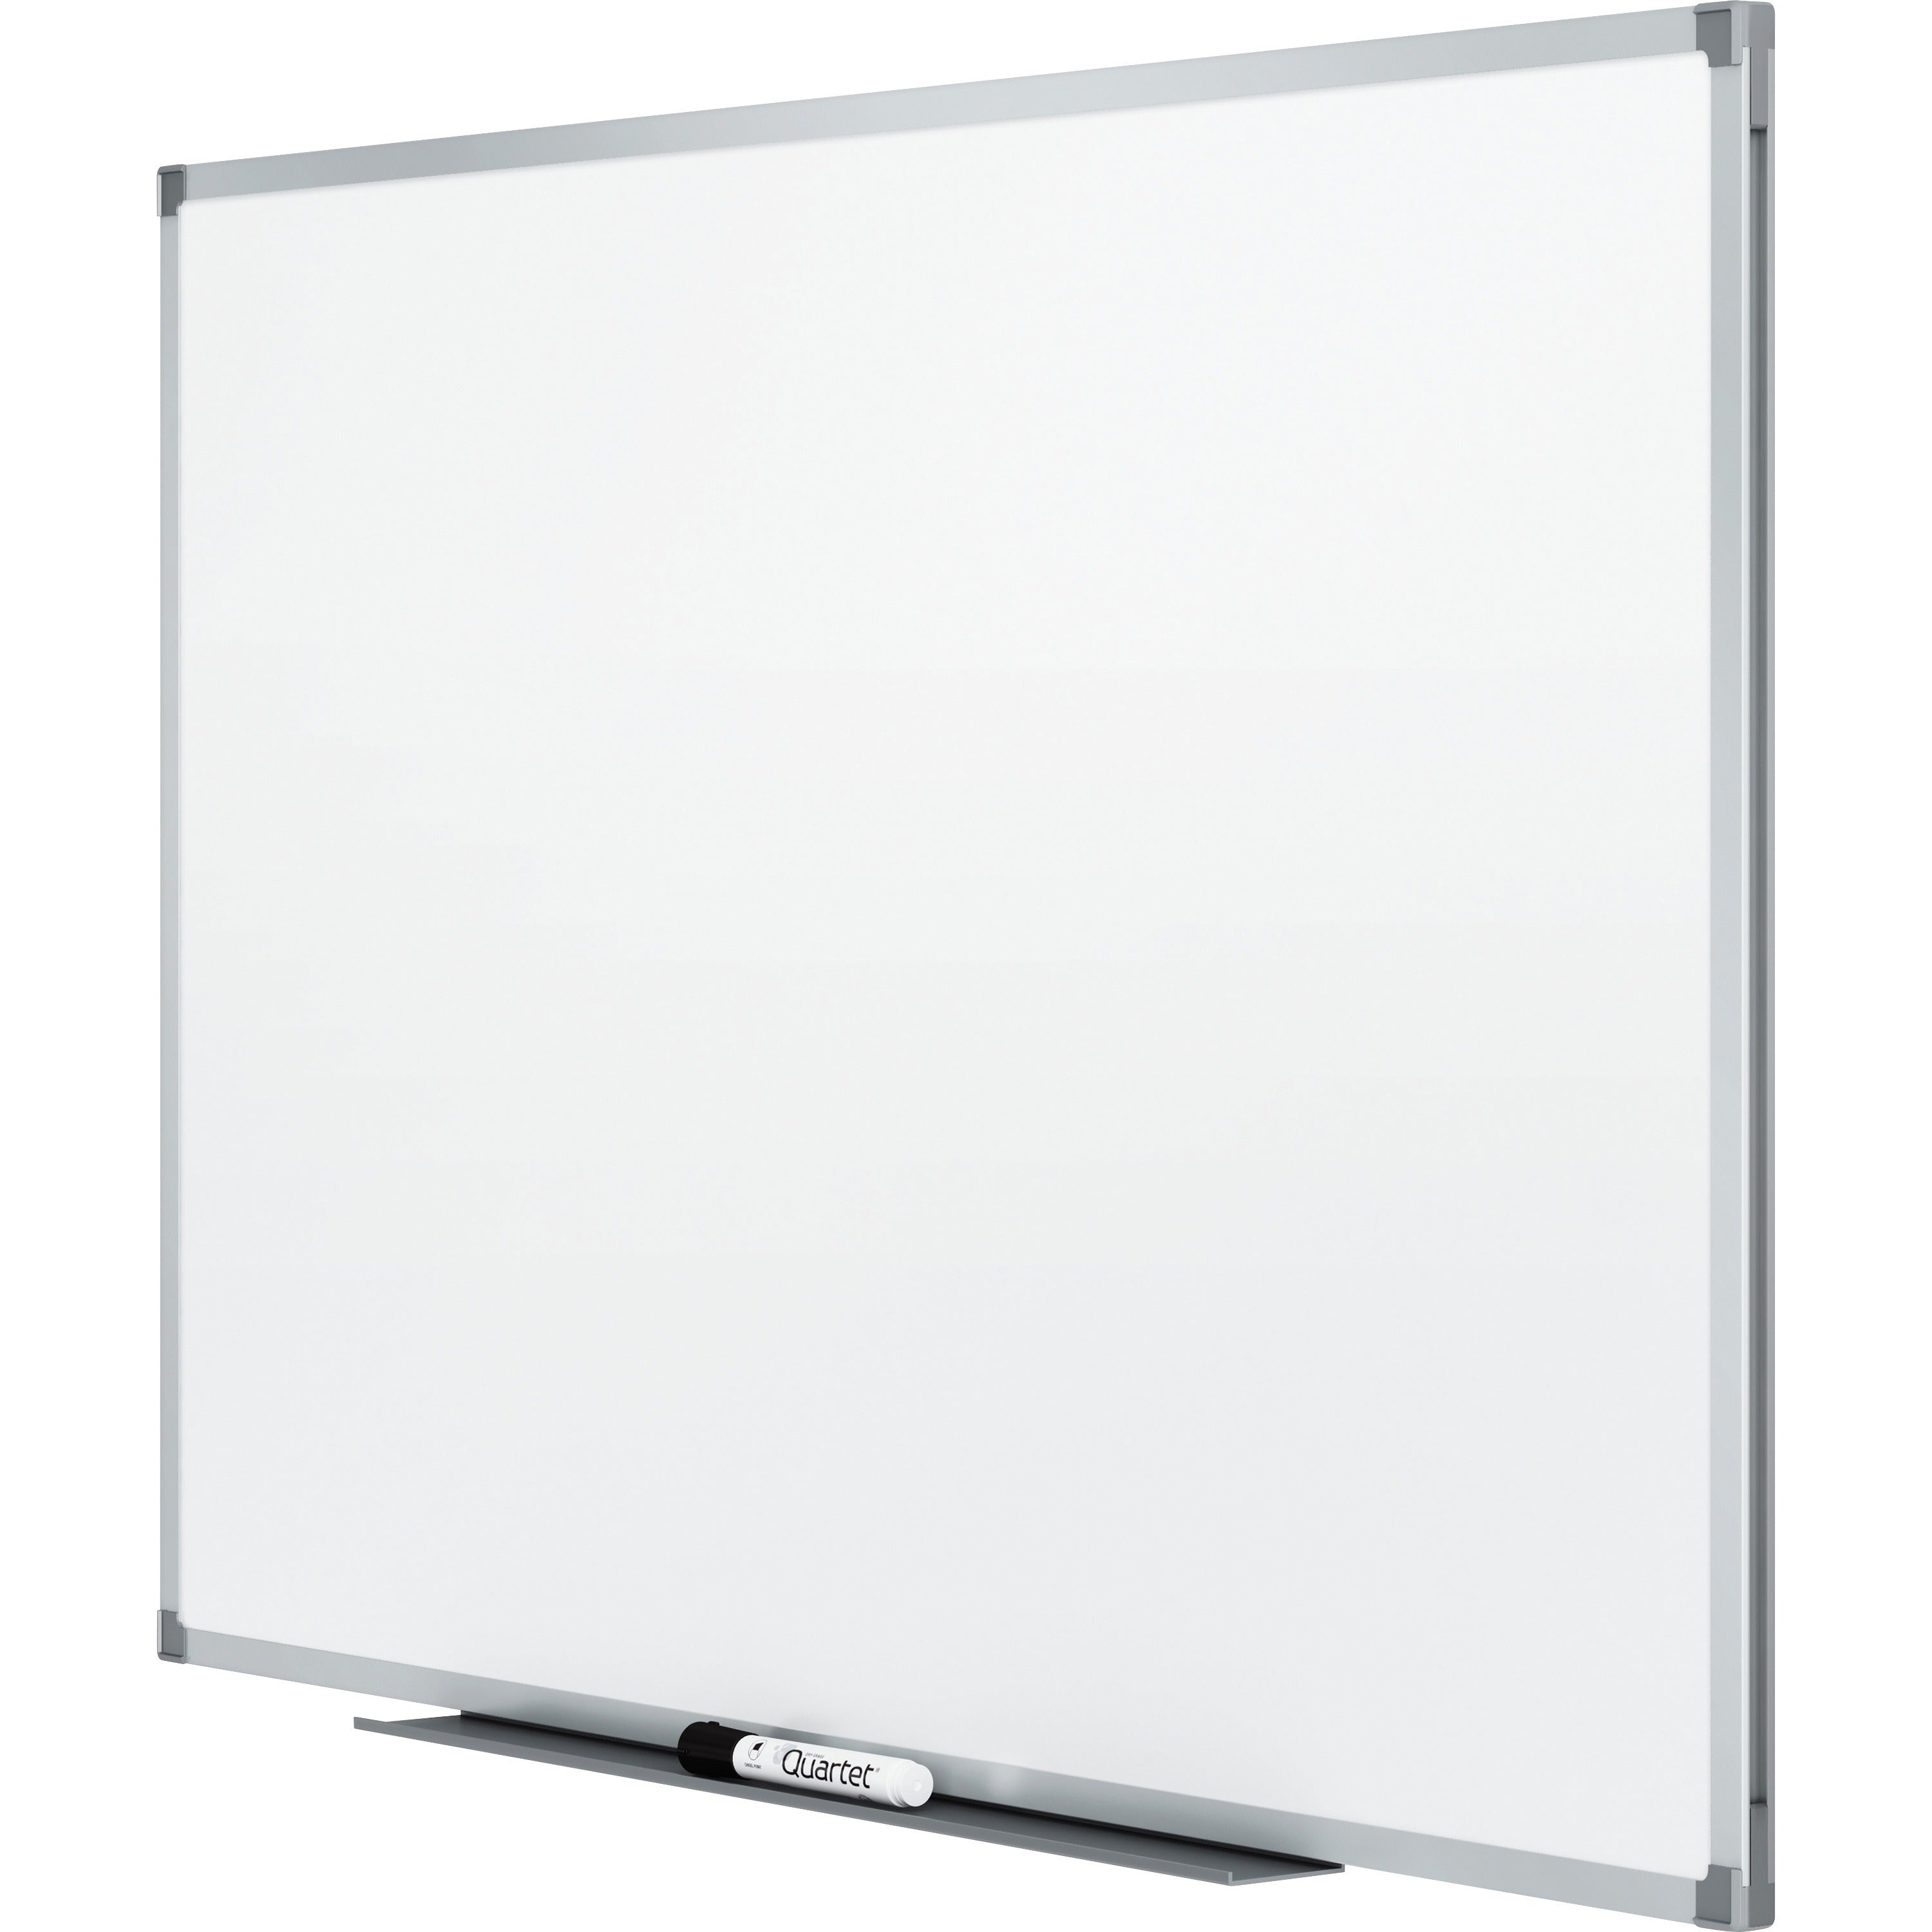 quartet-standard-duramax-magnetic-whiteboard-48-4-ft-width-x-36-3-ft-height-white-porcelain-surface-silver-aluminum-frame-rectangle-horizontal-vertical-magnetic-assembly-required-1-each-taa-compliant_qrt85516 - 2